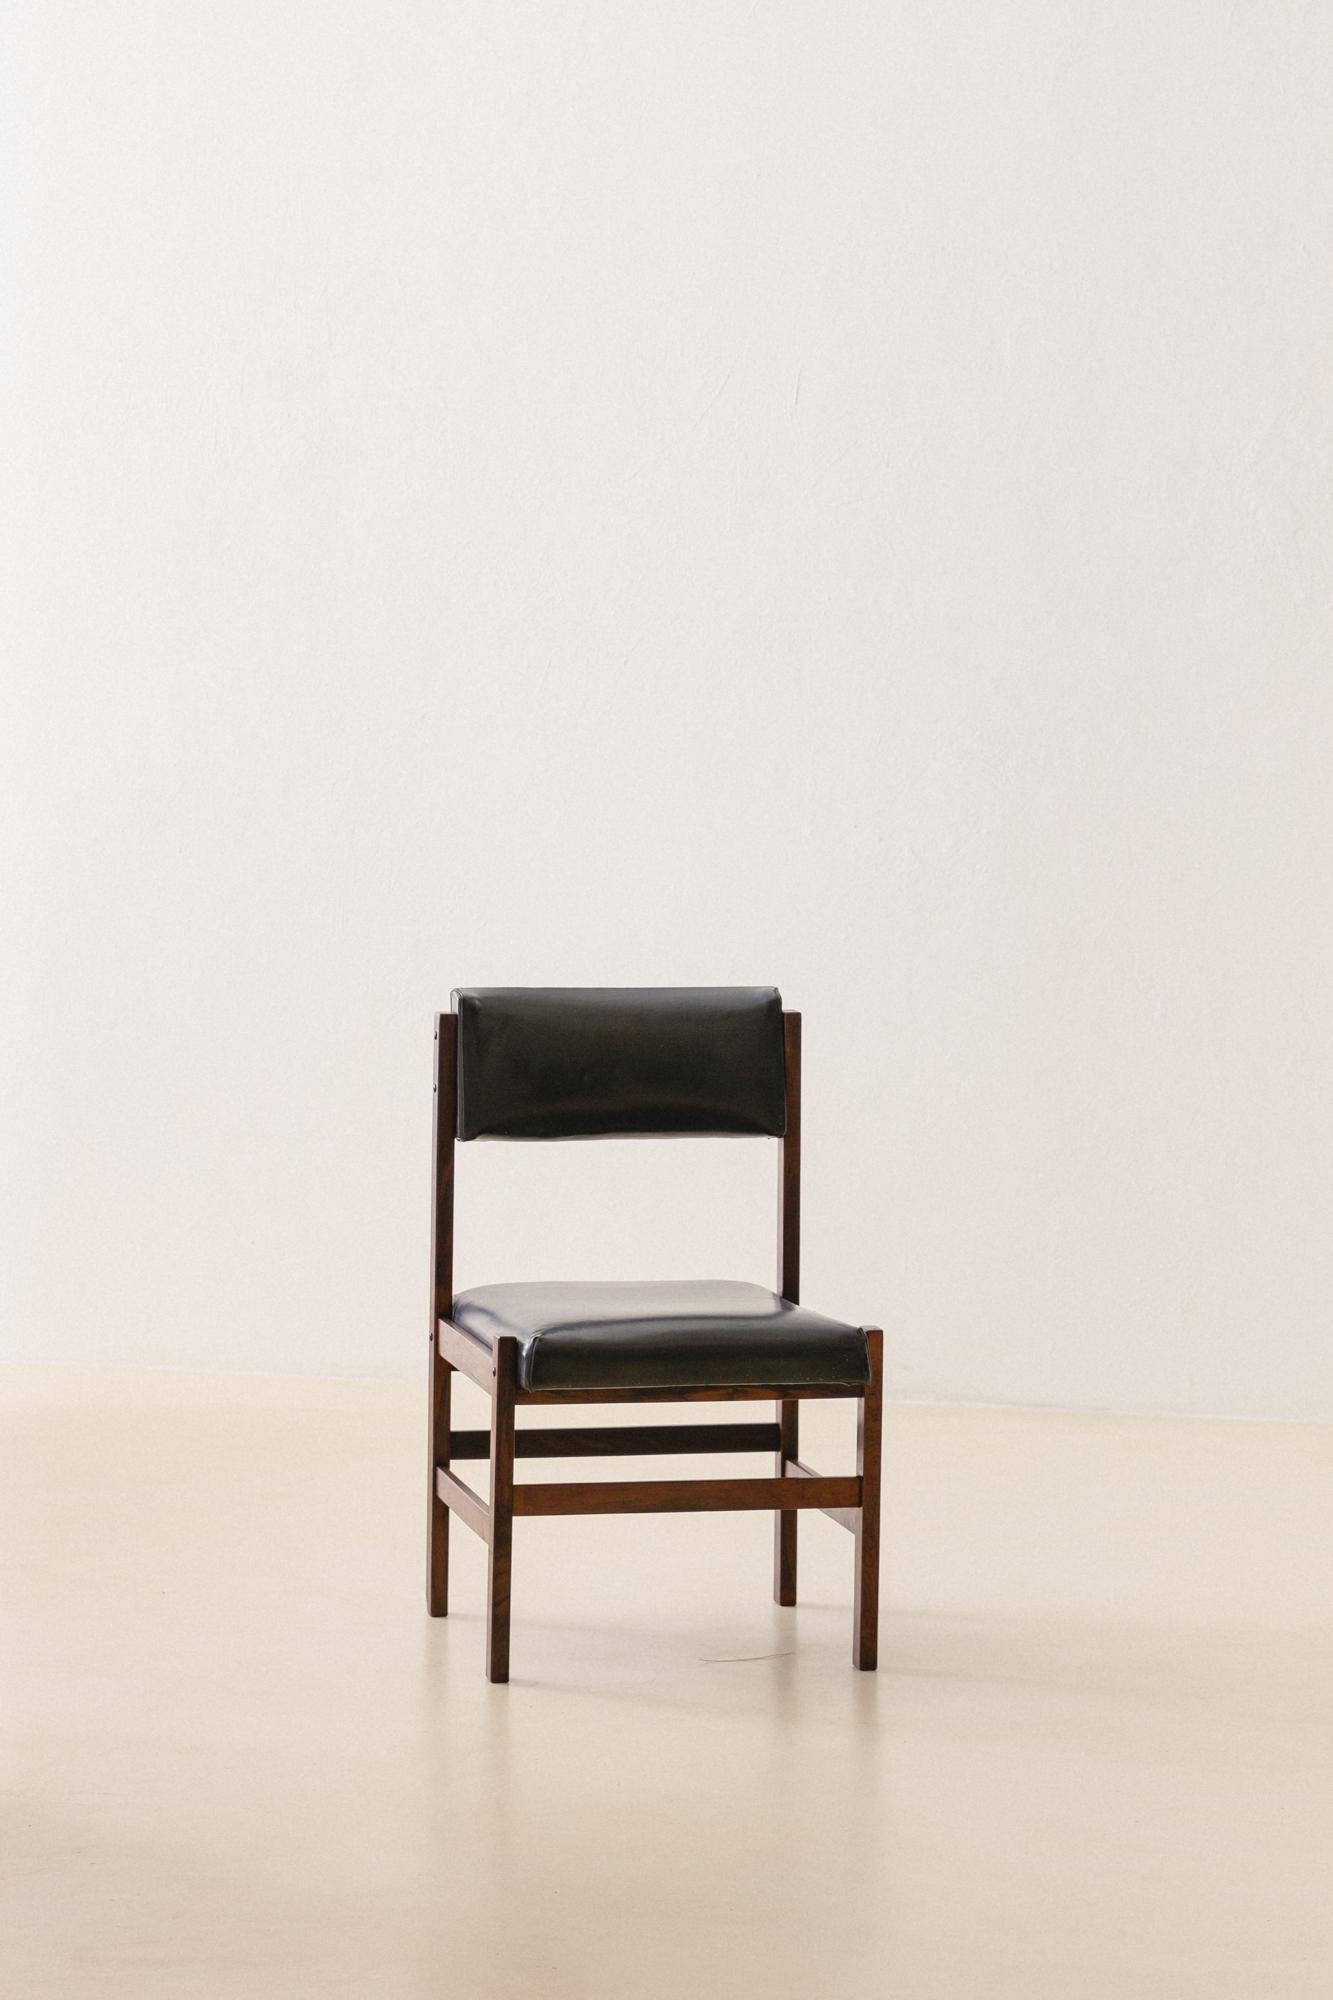 This chair is composed of solid Rosewood, with black synthetic leather seats and backrests. The set is composed of 11 chairs.

Even with authorship unidentified, these chairs are very similar with other pieces produced in the 1960s by the most